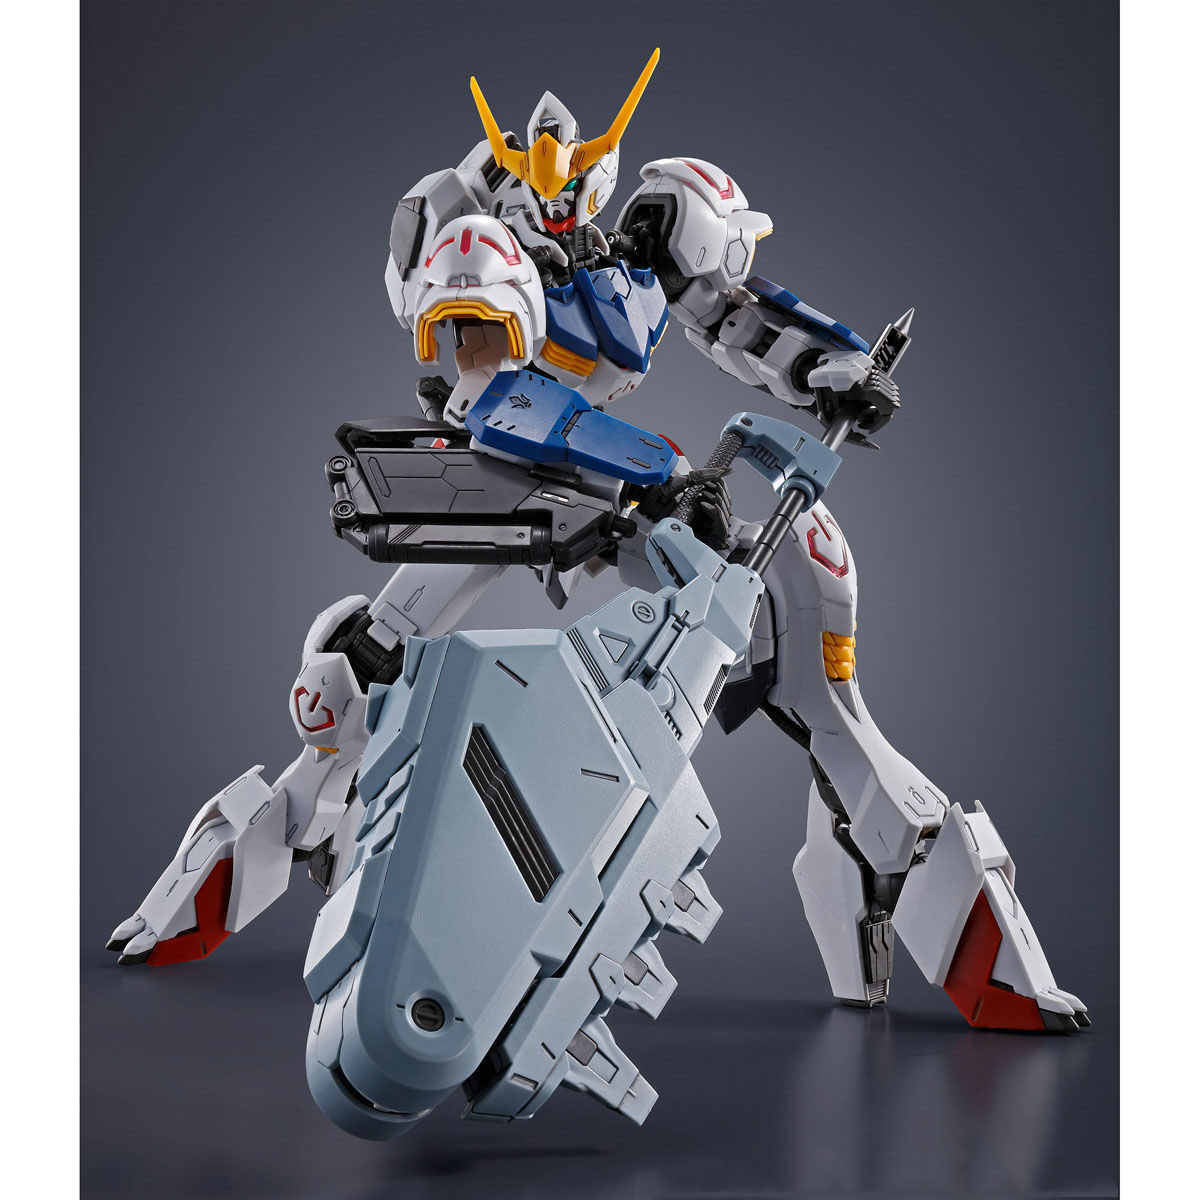 Mg 1 100 Expansion Parts Set For Gundam Barbatos Nov 2020 Delivery Gundam Premium Bandai Singapore Online Store For Action Figures Model Kits Toys And More